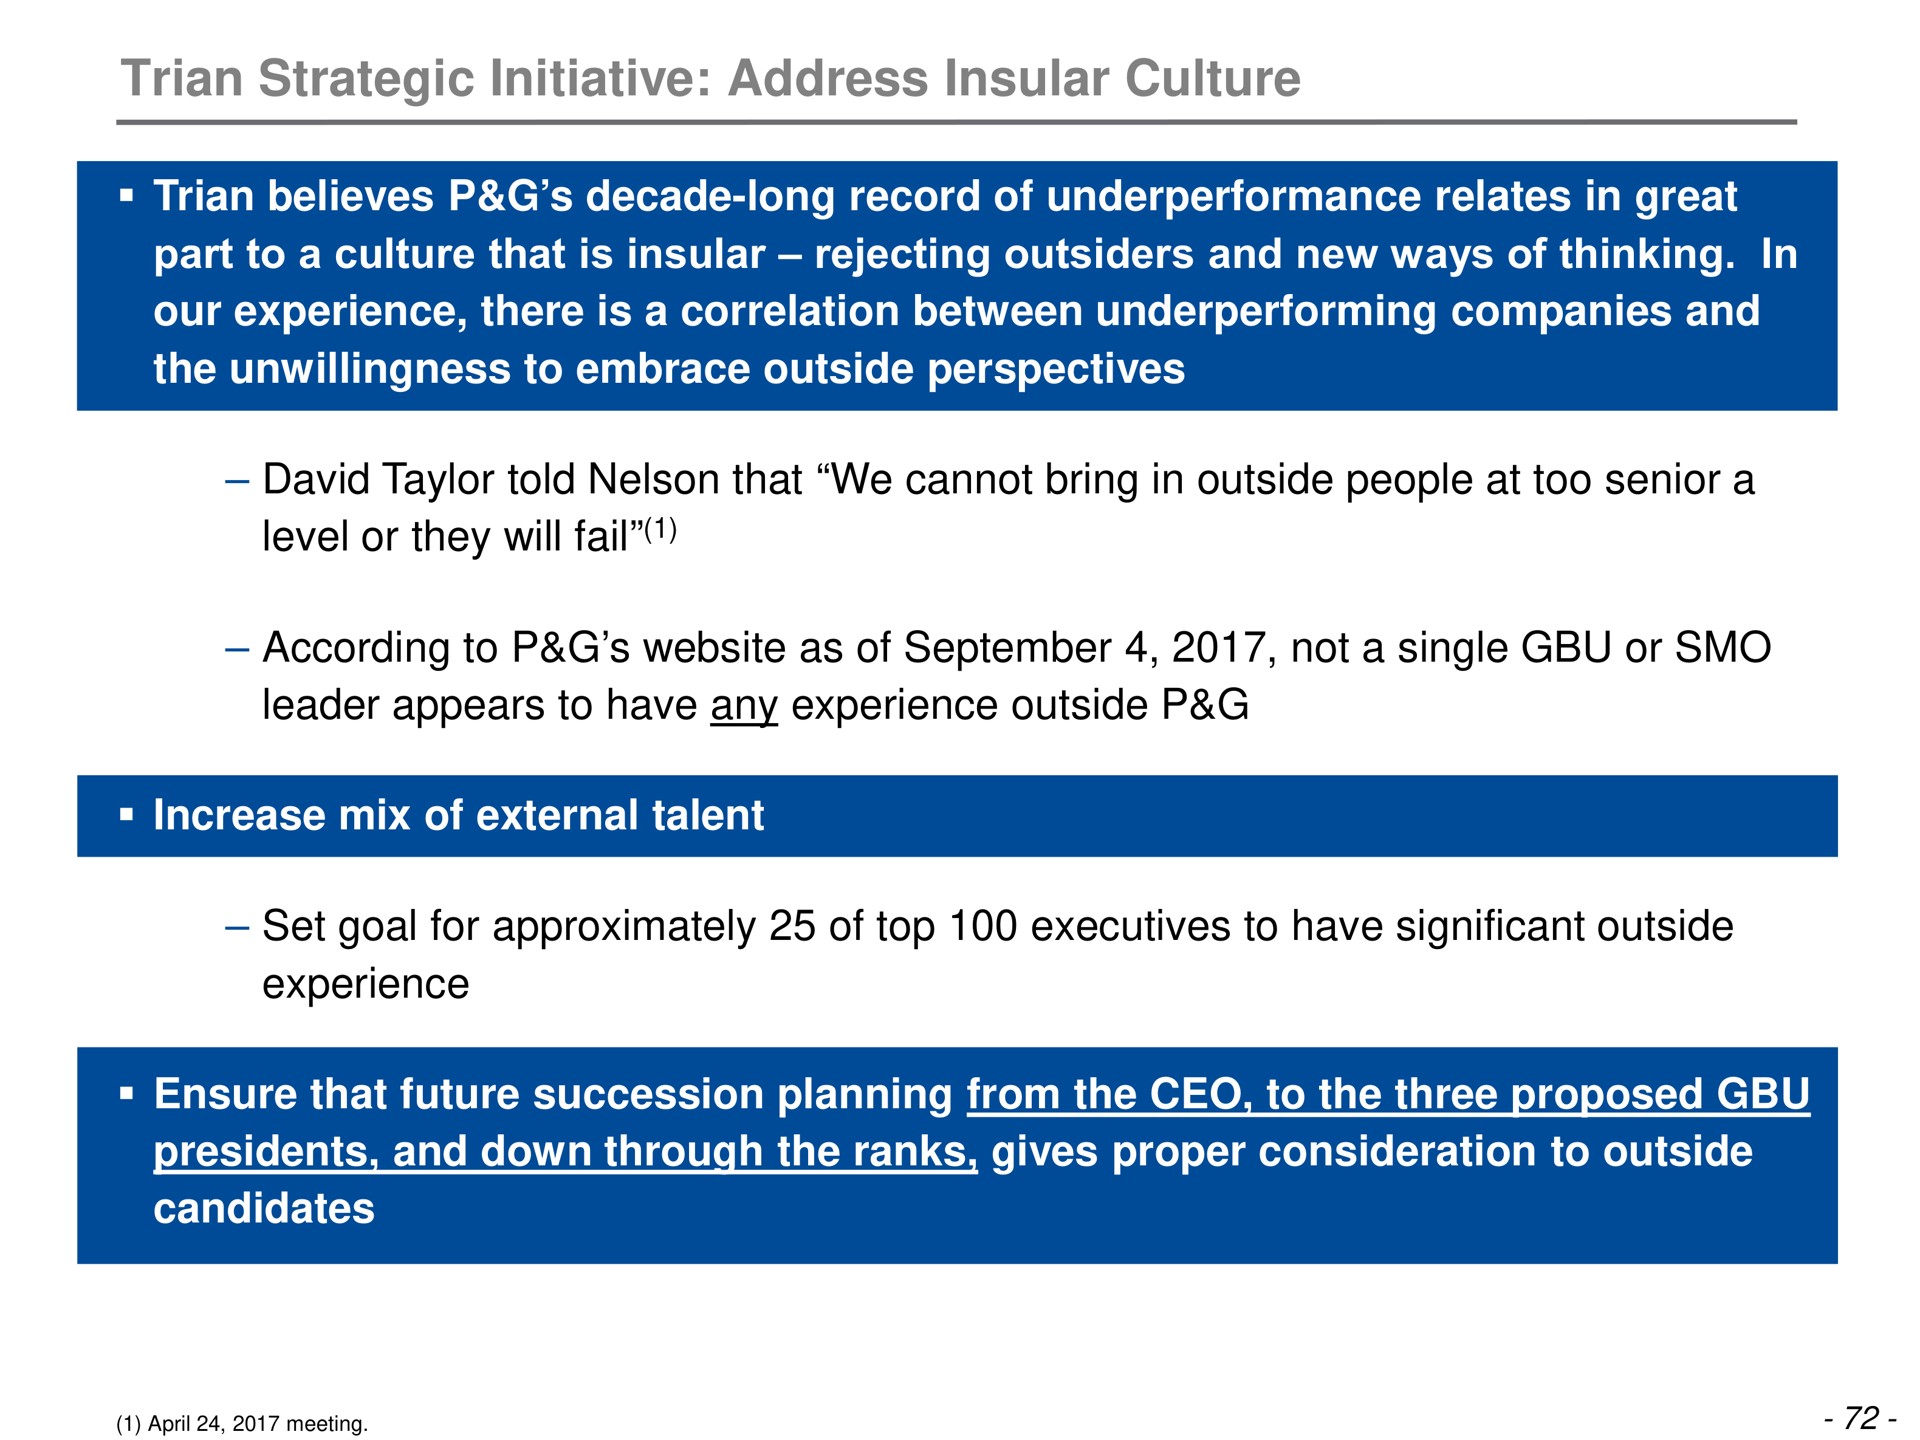 strategic initiative address insular culture believes decade long record of relates in great part to a culture that is insular rejecting outsiders and new ways of thinking in our experience there is a correlation between companies and the unwillingness to embrace outside perspectives told nelson that we cannot bring in outside people at too senior a level or they will fail according to as of not a single or leader appears to have any experience outside increase mix of external talent set goal for approximately of top executives to have significant outside experience ensure that future succession planning from the to the three proposed presidents and down through the ranks gives proper consideration to outside candidates | Trian Partners